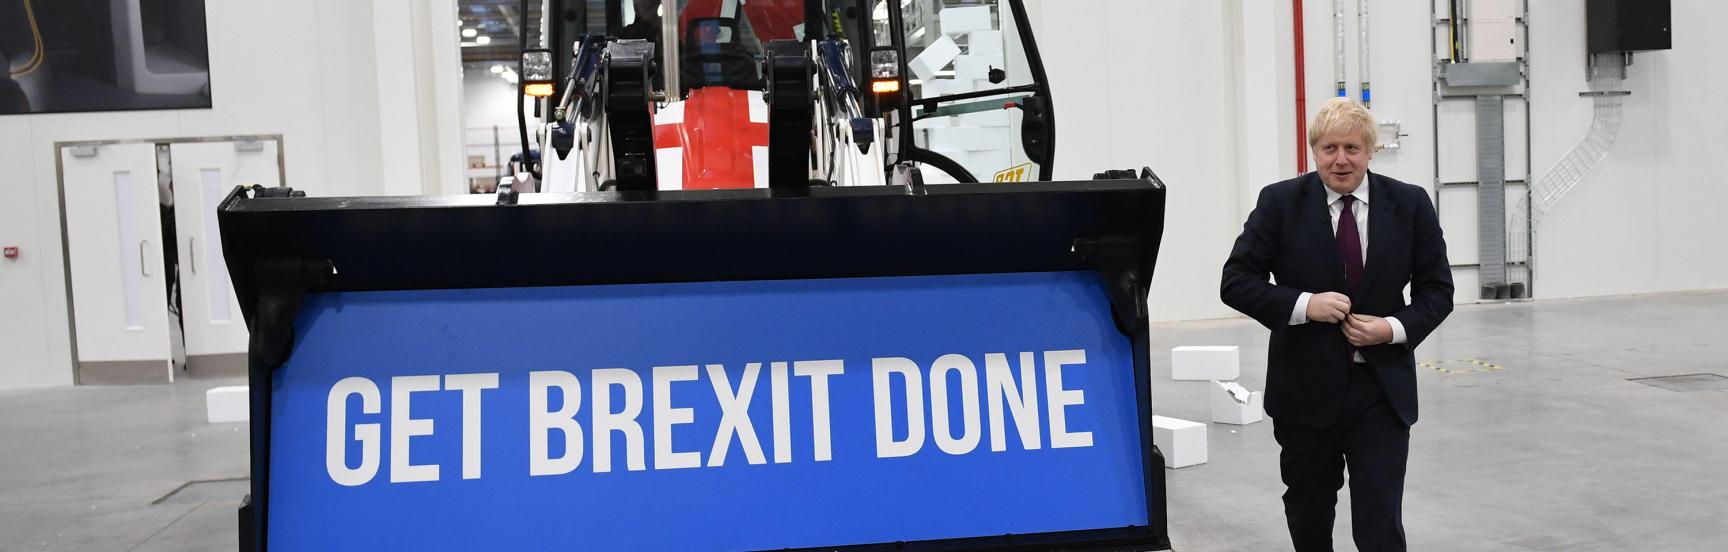 Boris Johnson and the Get Brexit Done digger